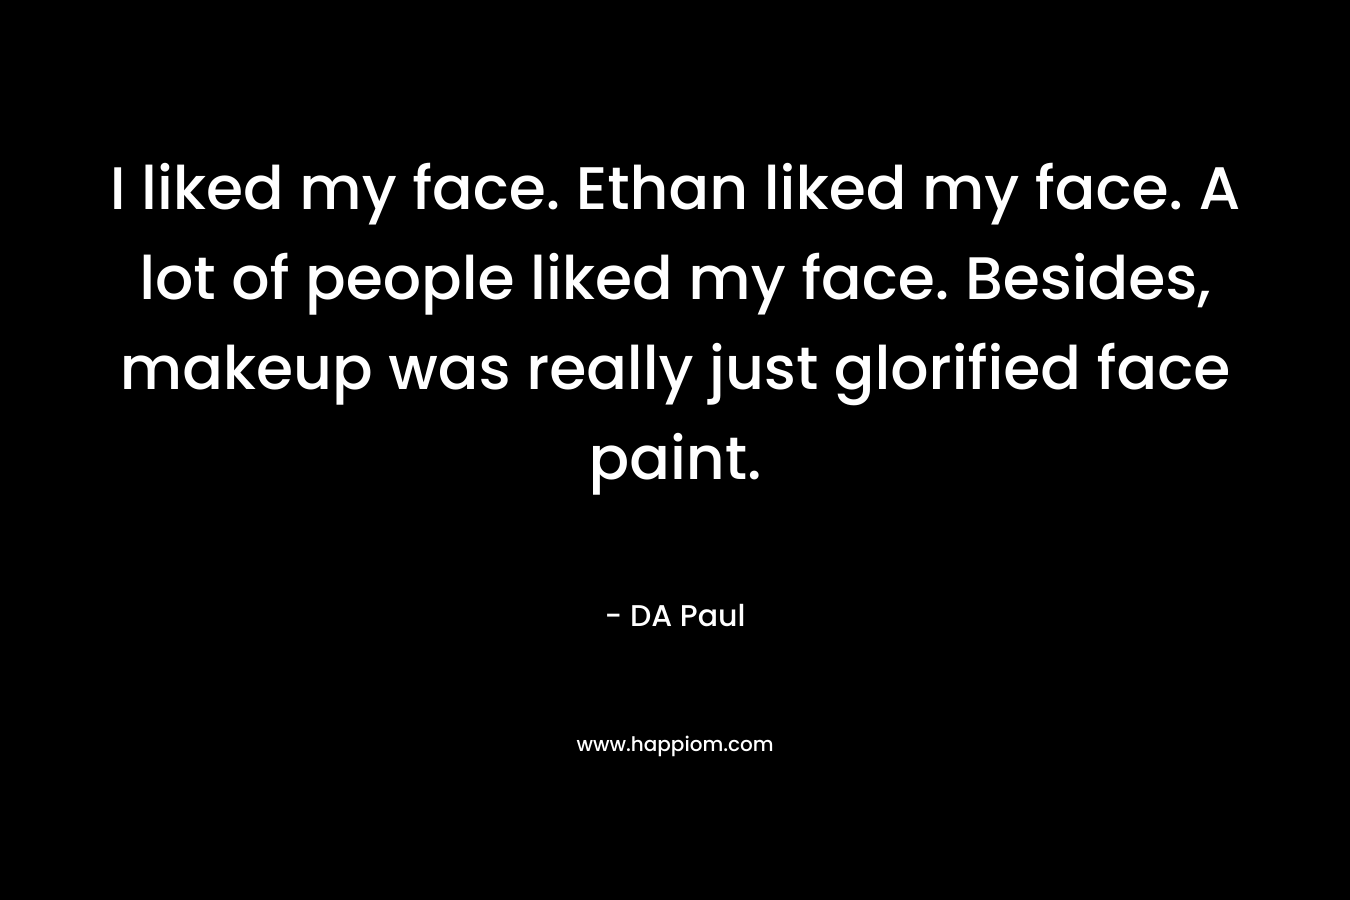 I liked my face. Ethan liked my face. A lot of people liked my face. Besides, makeup was really just glorified face paint. – DA Paul